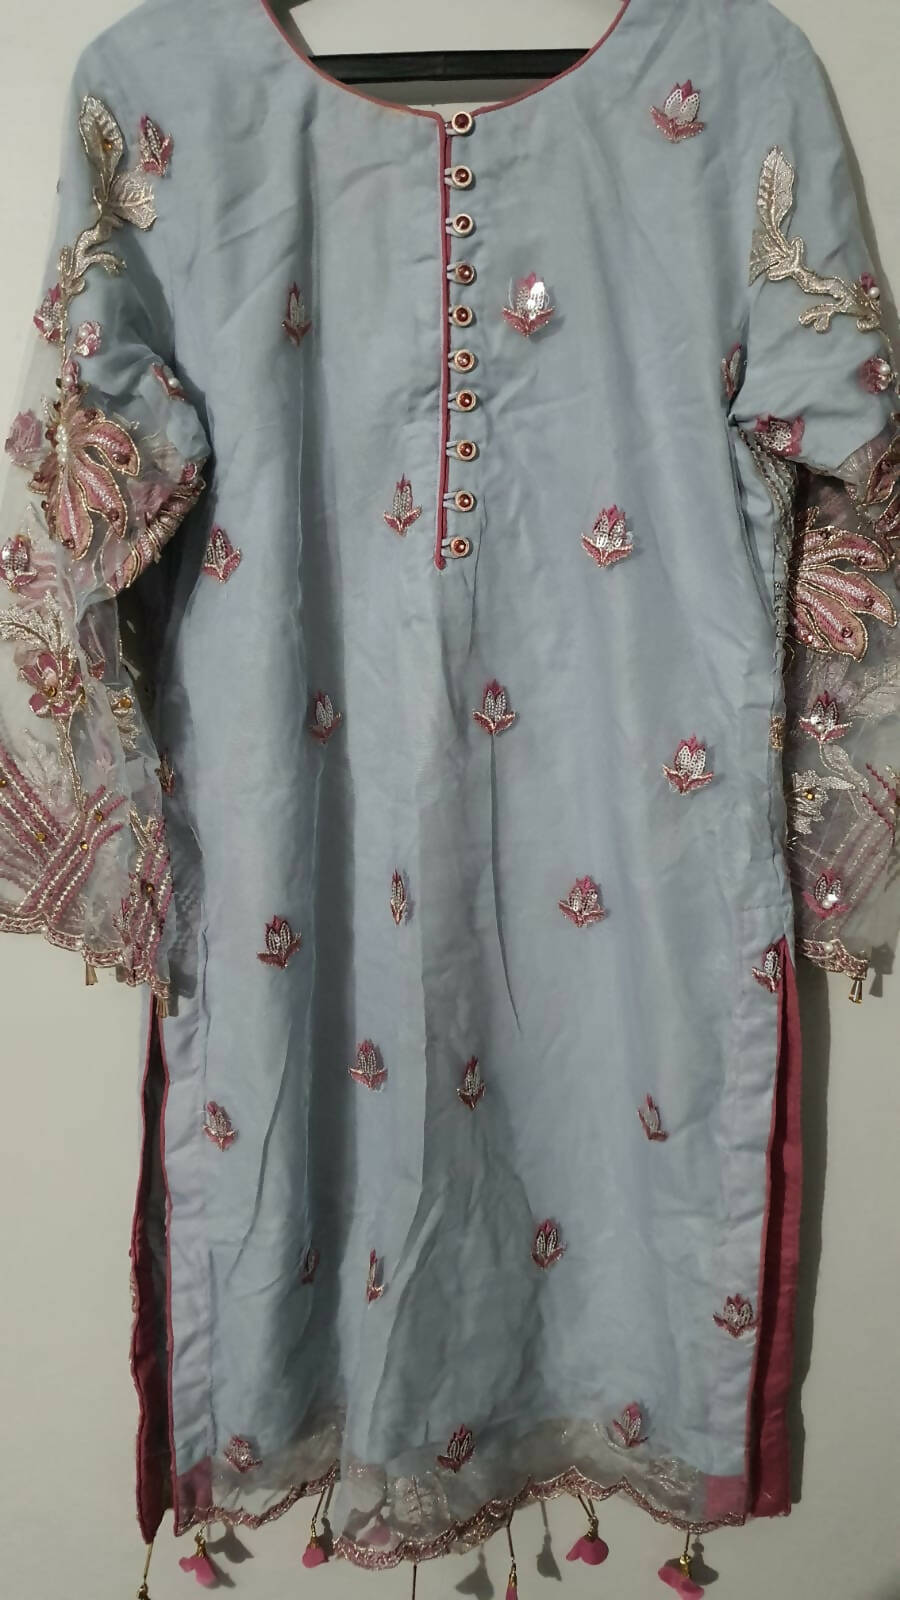 Heavy Embroided Suit | Women Locally Made Formals | Medium | Worn Once